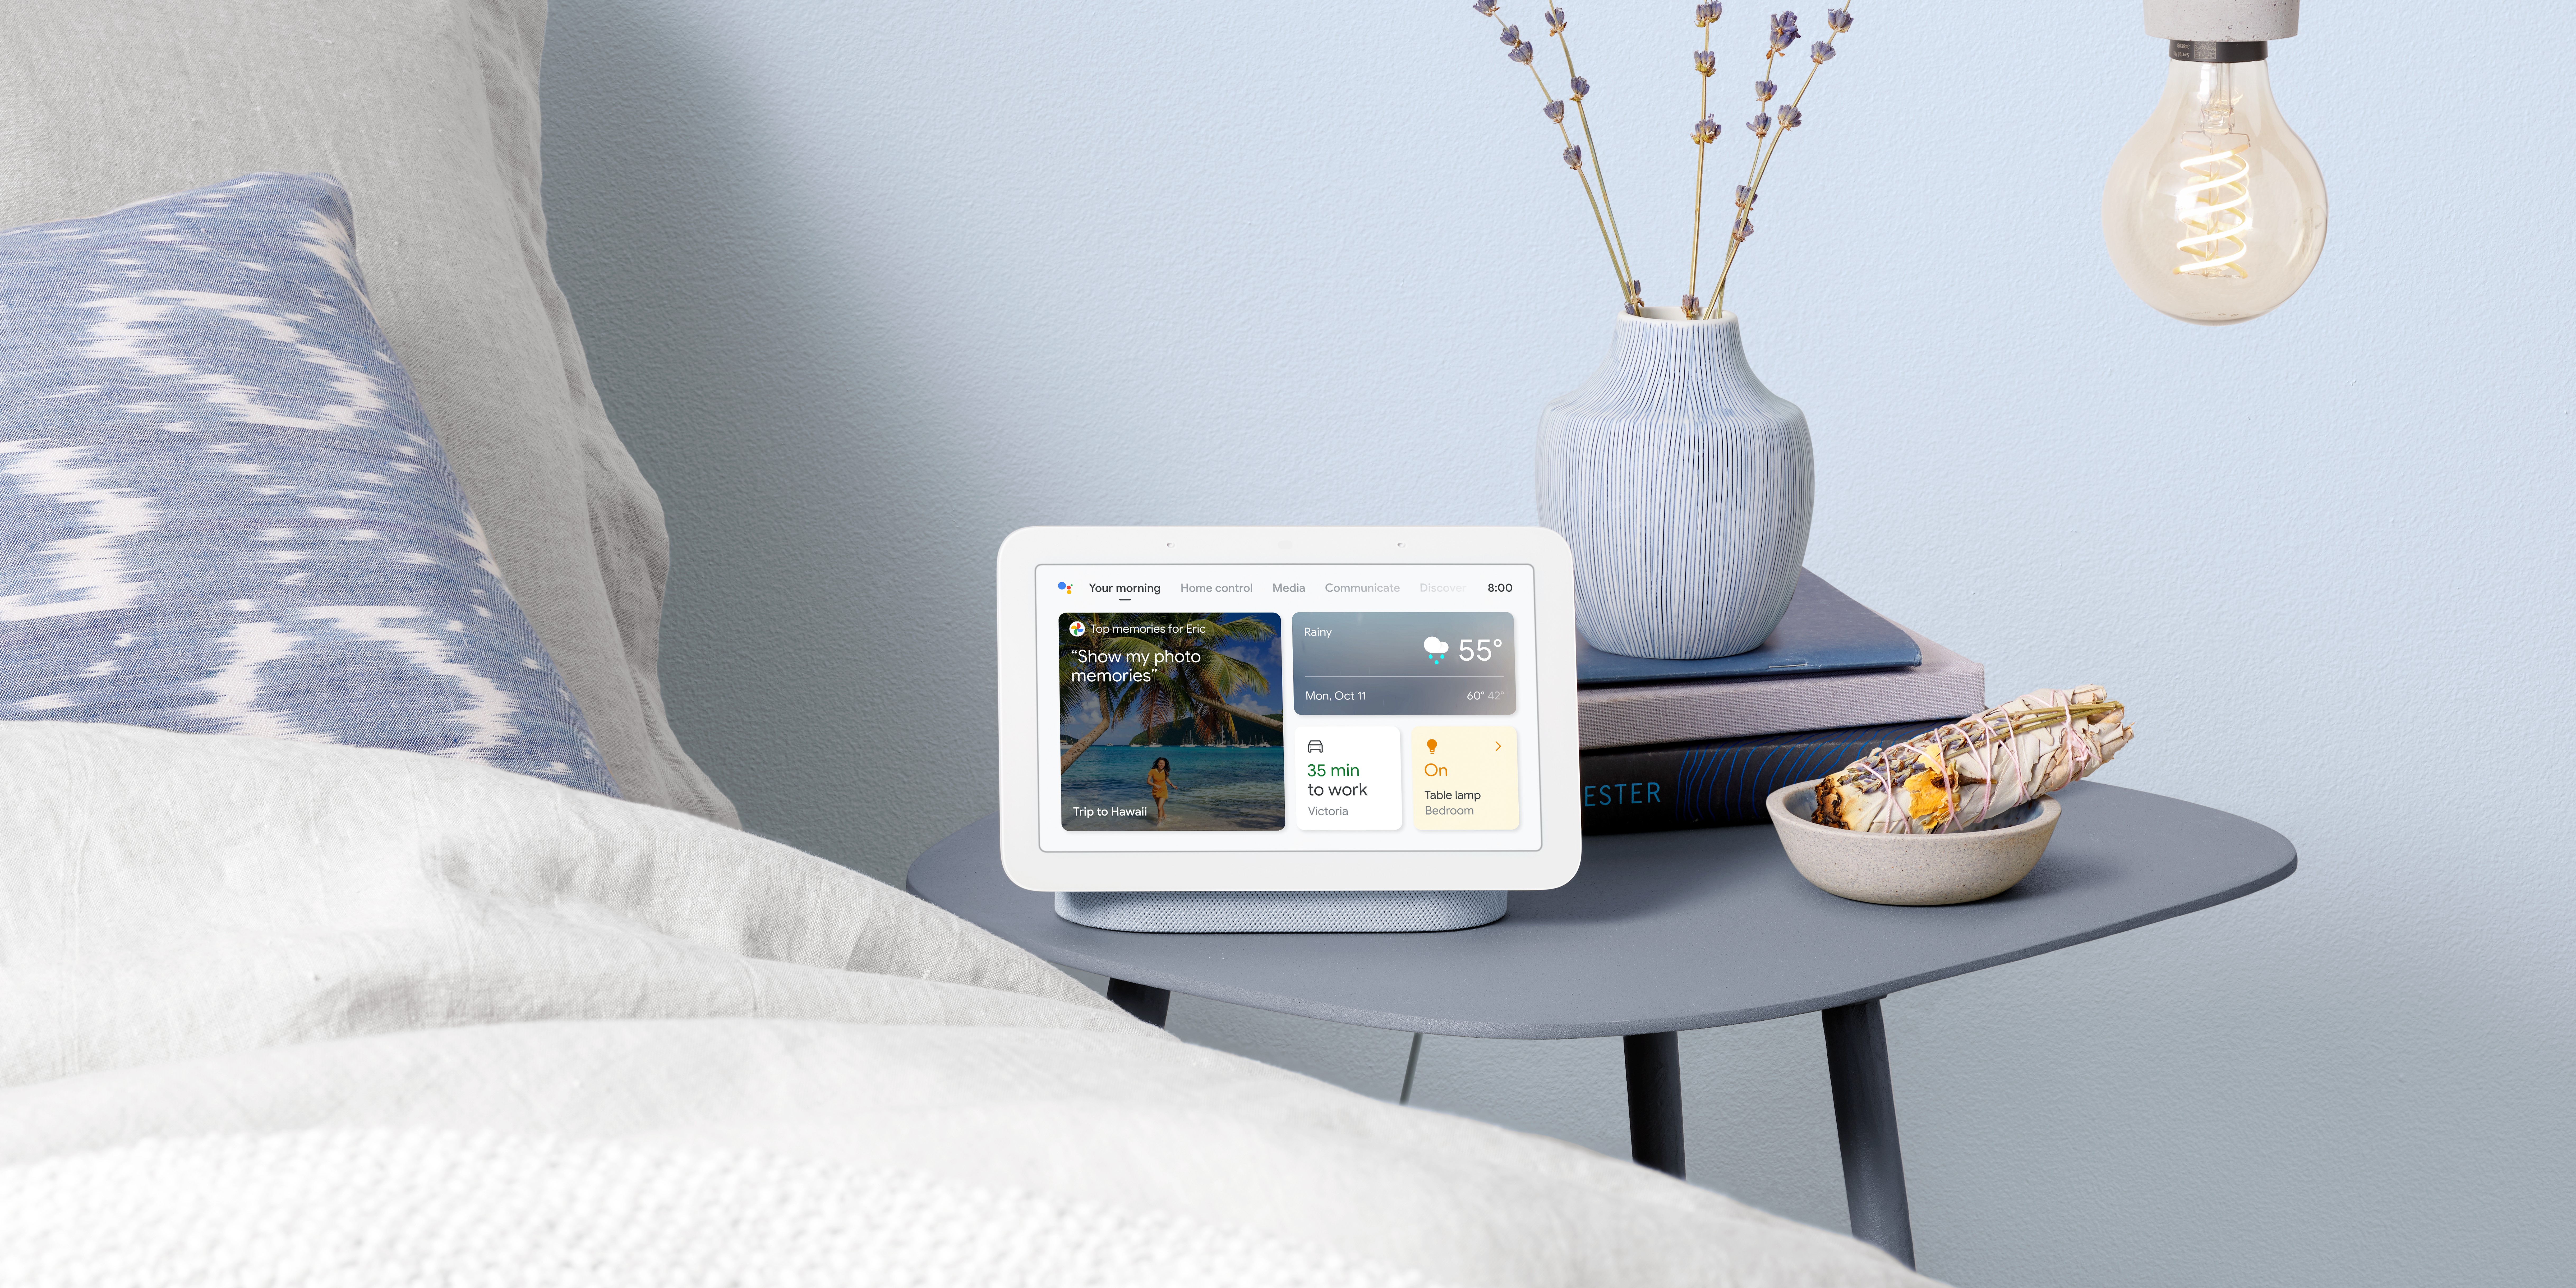 We slept with the Google Nest Hub beside us. Here's what we learnt -